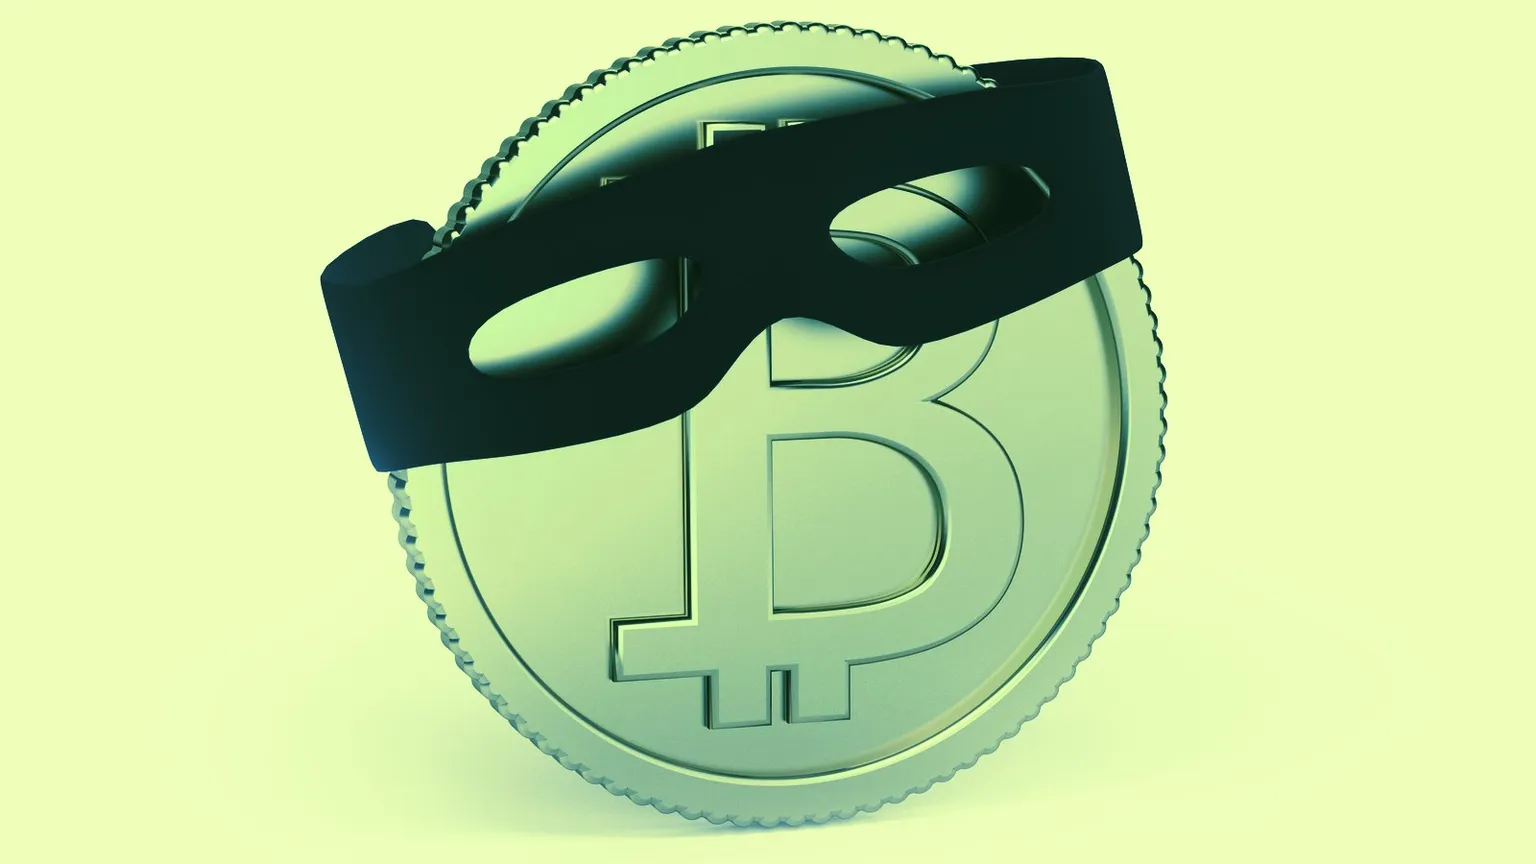 A message signed by Bitcoin addresses Craig Wright purportedly owns, calls him a “liar and a fraud.” Image: Shutterstock